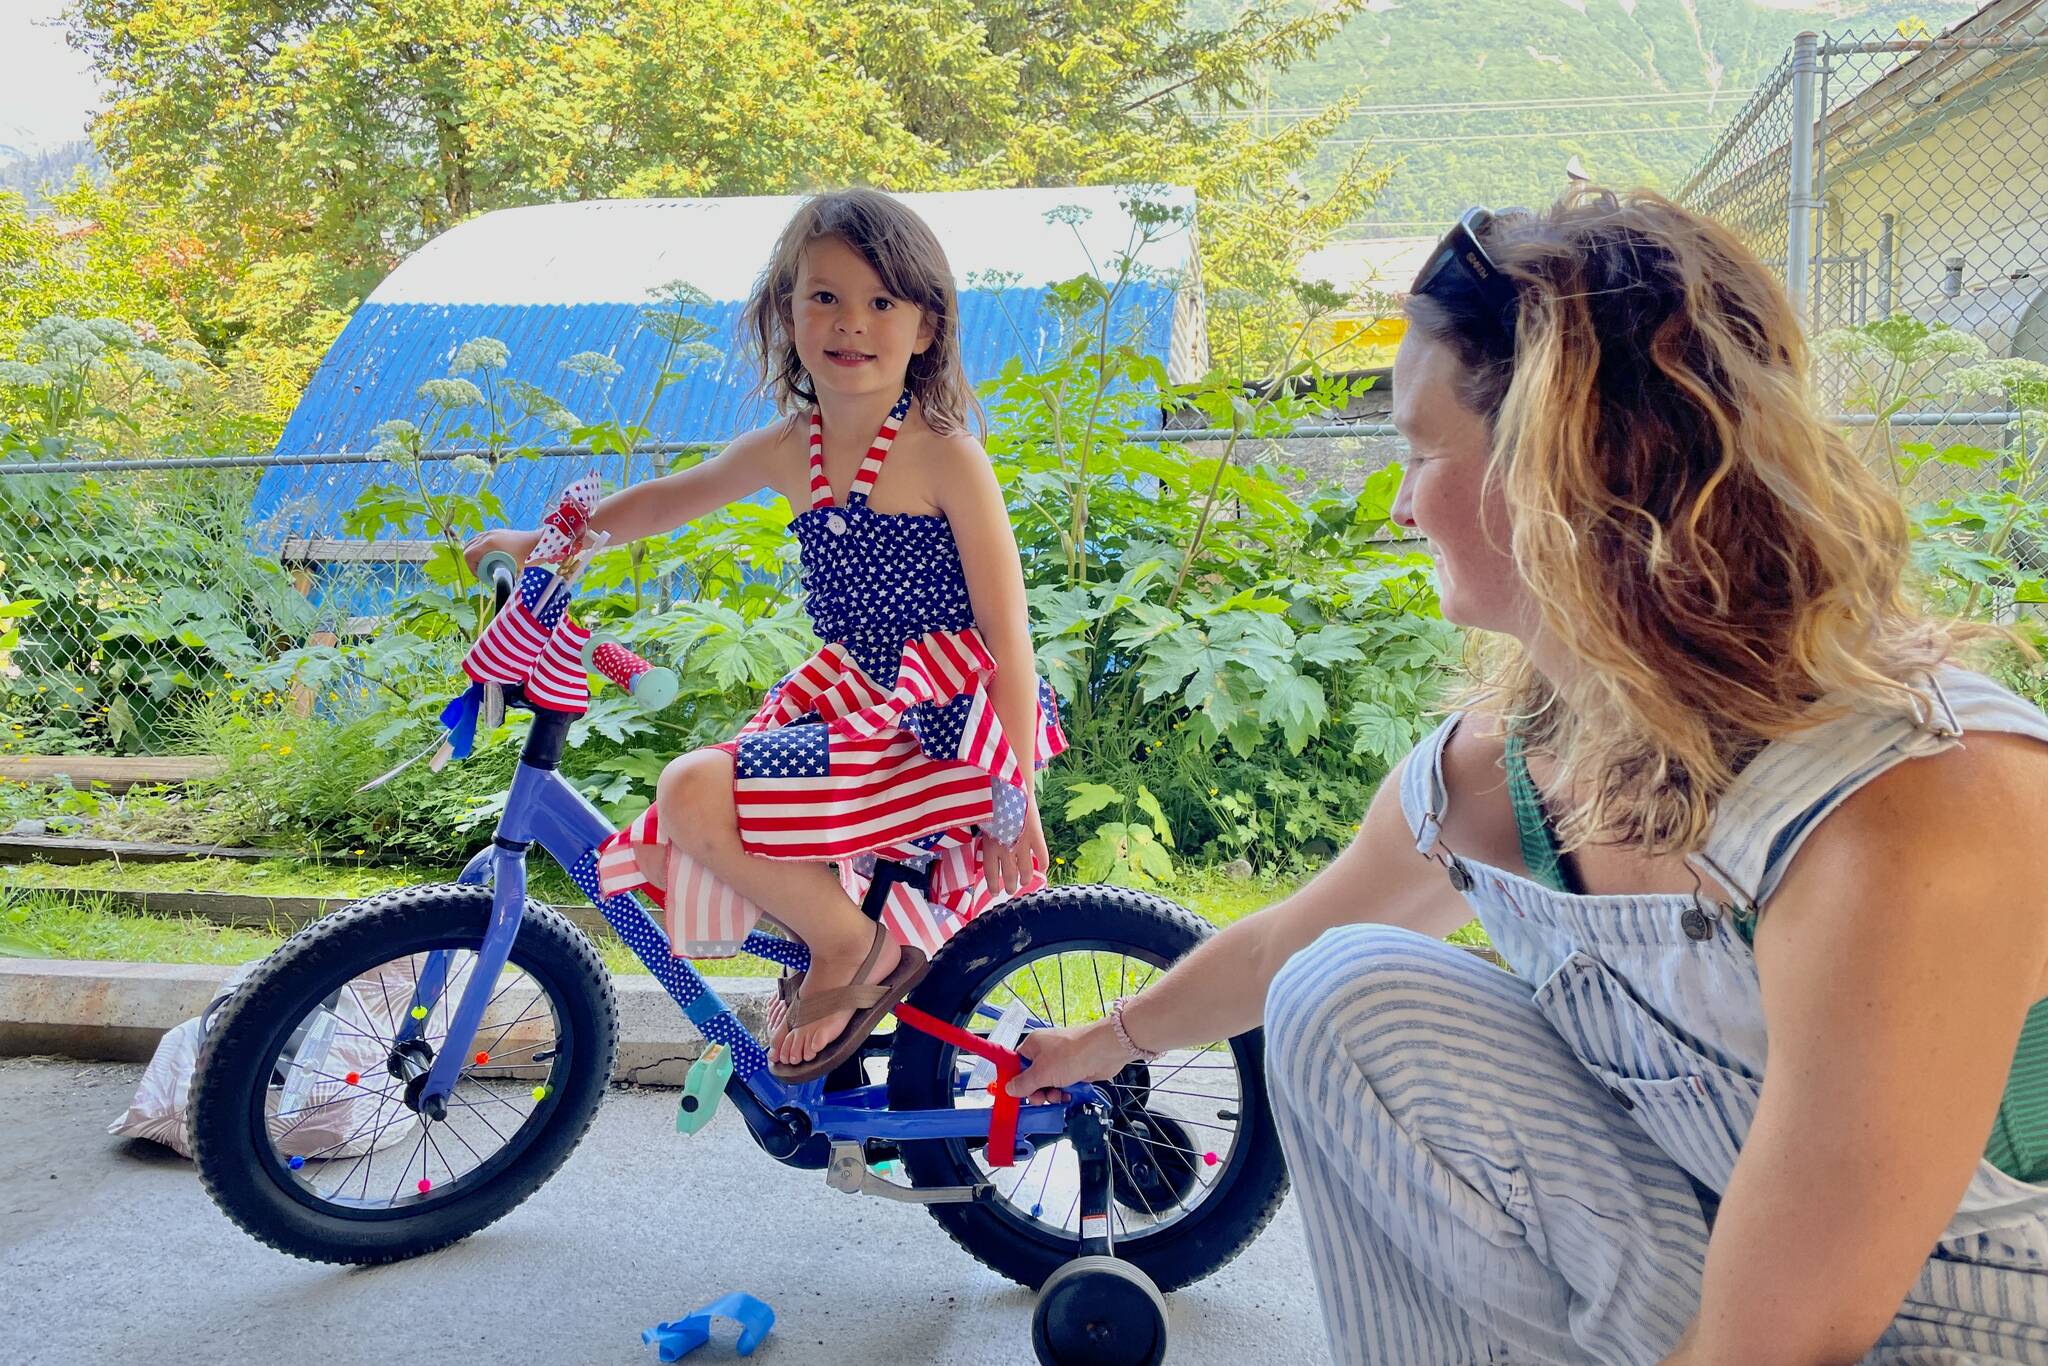 Sayler Williams, left, poses with her freshly decorated bike as Abby Williams looks on during the Douglas Fourth of July Committee’s annual Bicycle Decorating session held at the Douglas Public Library on July 2, 2022. (Michael S. Lockett / Juneau Empire)